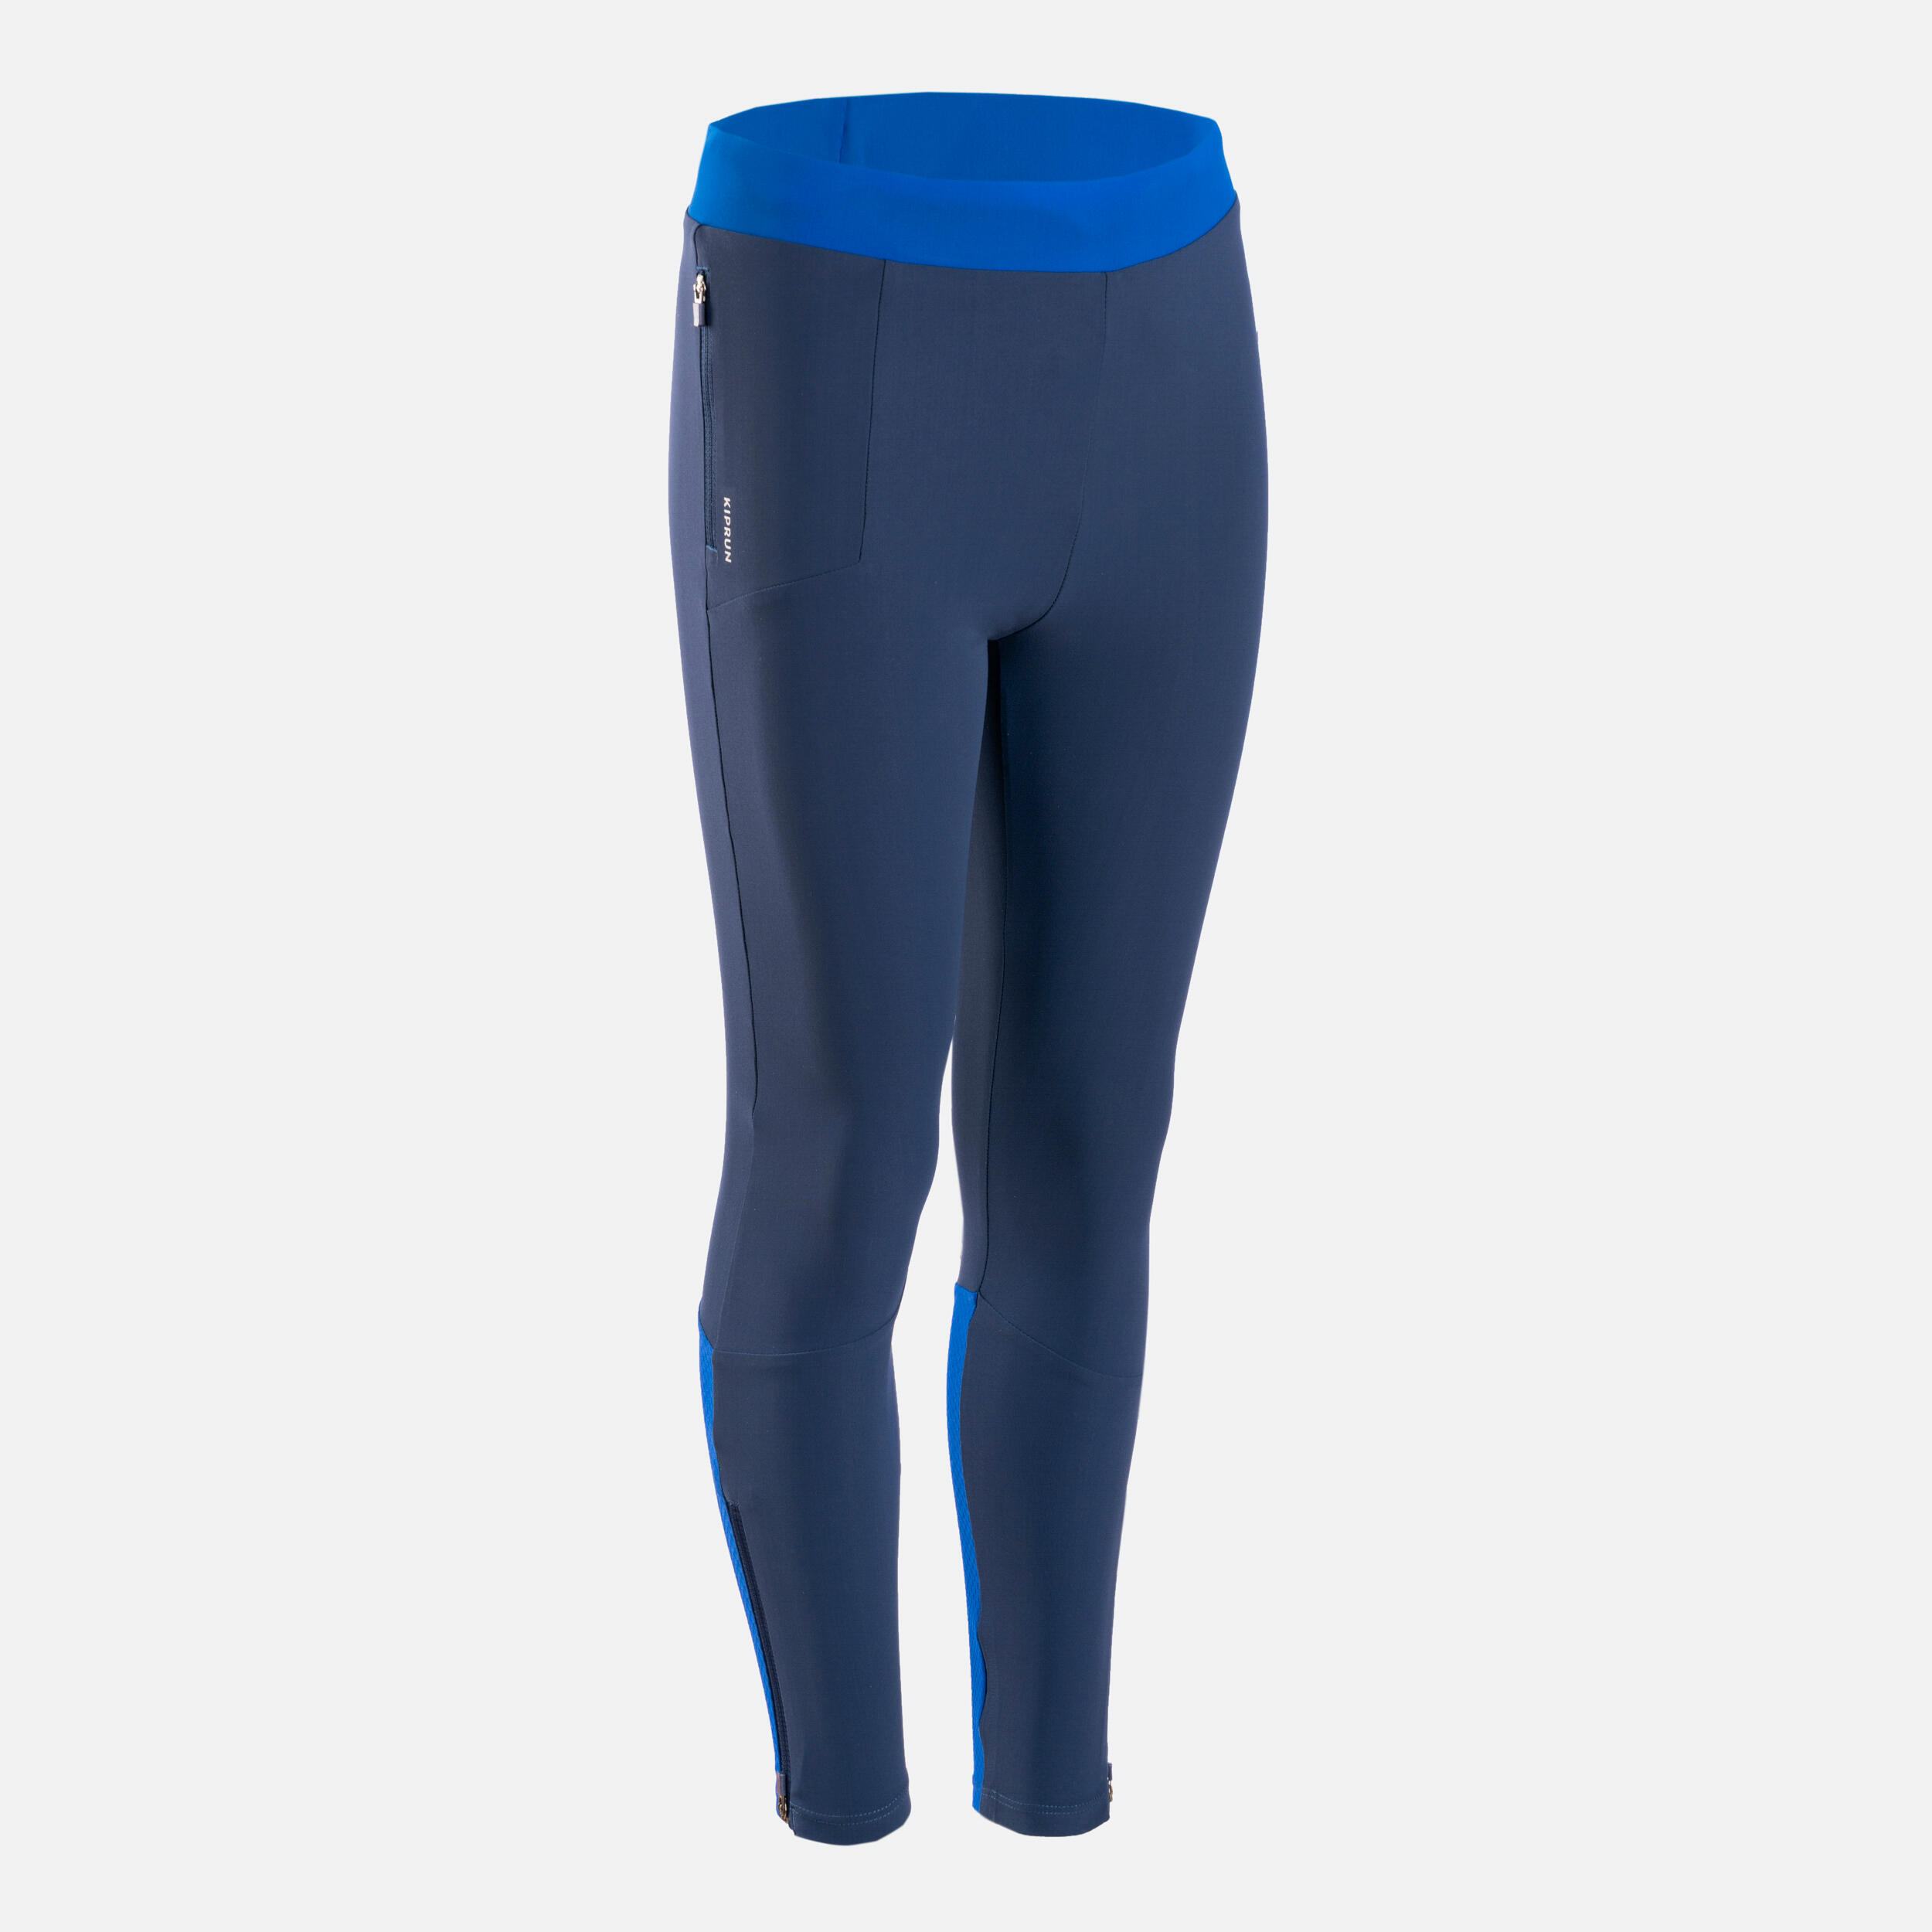 KIDS' RUNNING TIGHTS - KIPRUN DRY+ NAVY BLUE AND ELECTRIC BLUE 1/12